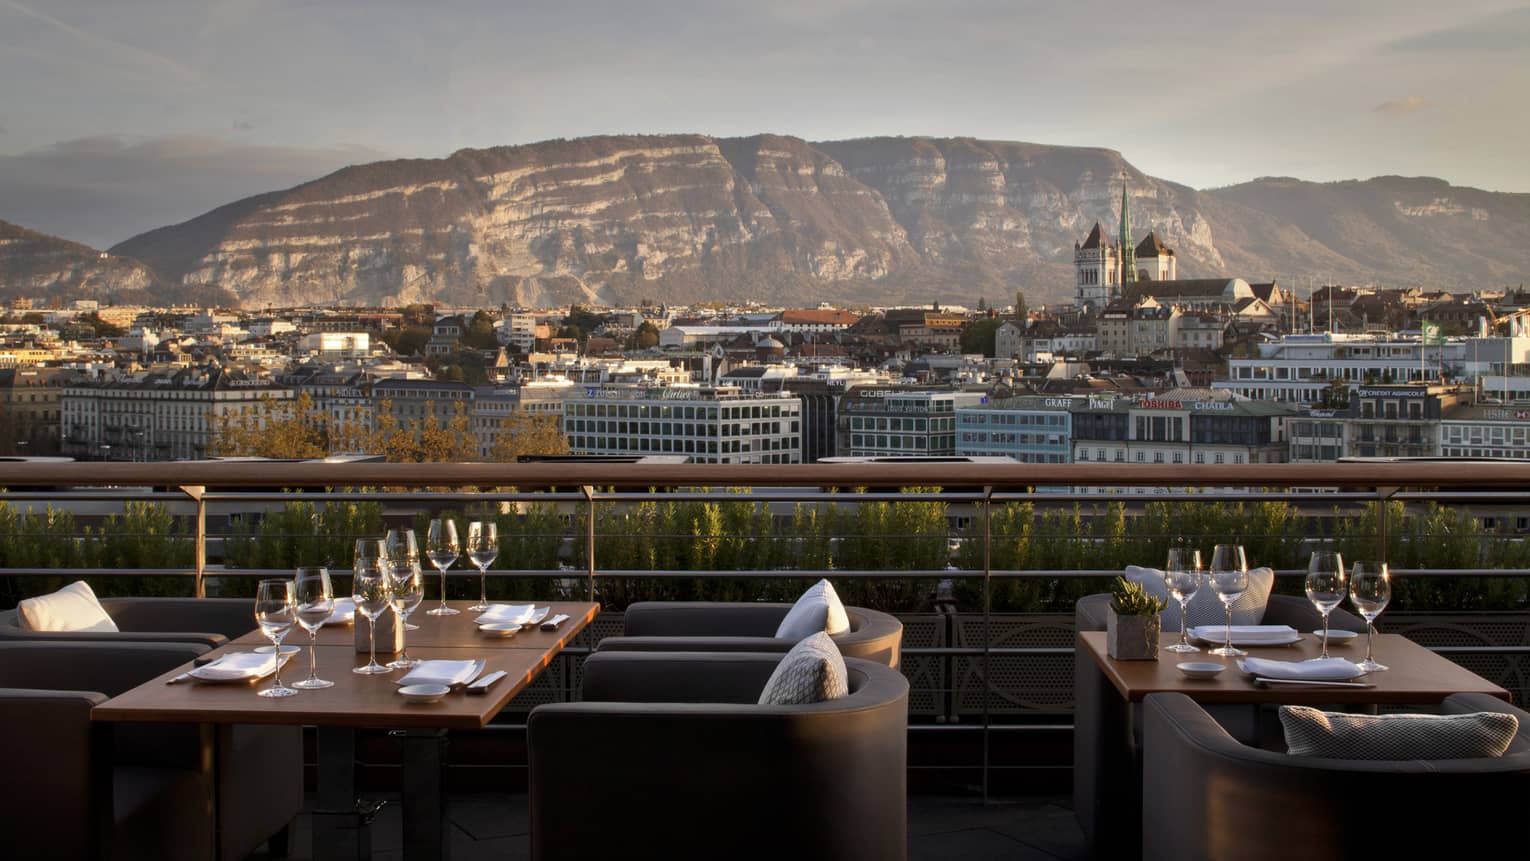 Outdoor patio with armchairs, tables set with wine glasses, overlooking city and mountain on sunny day